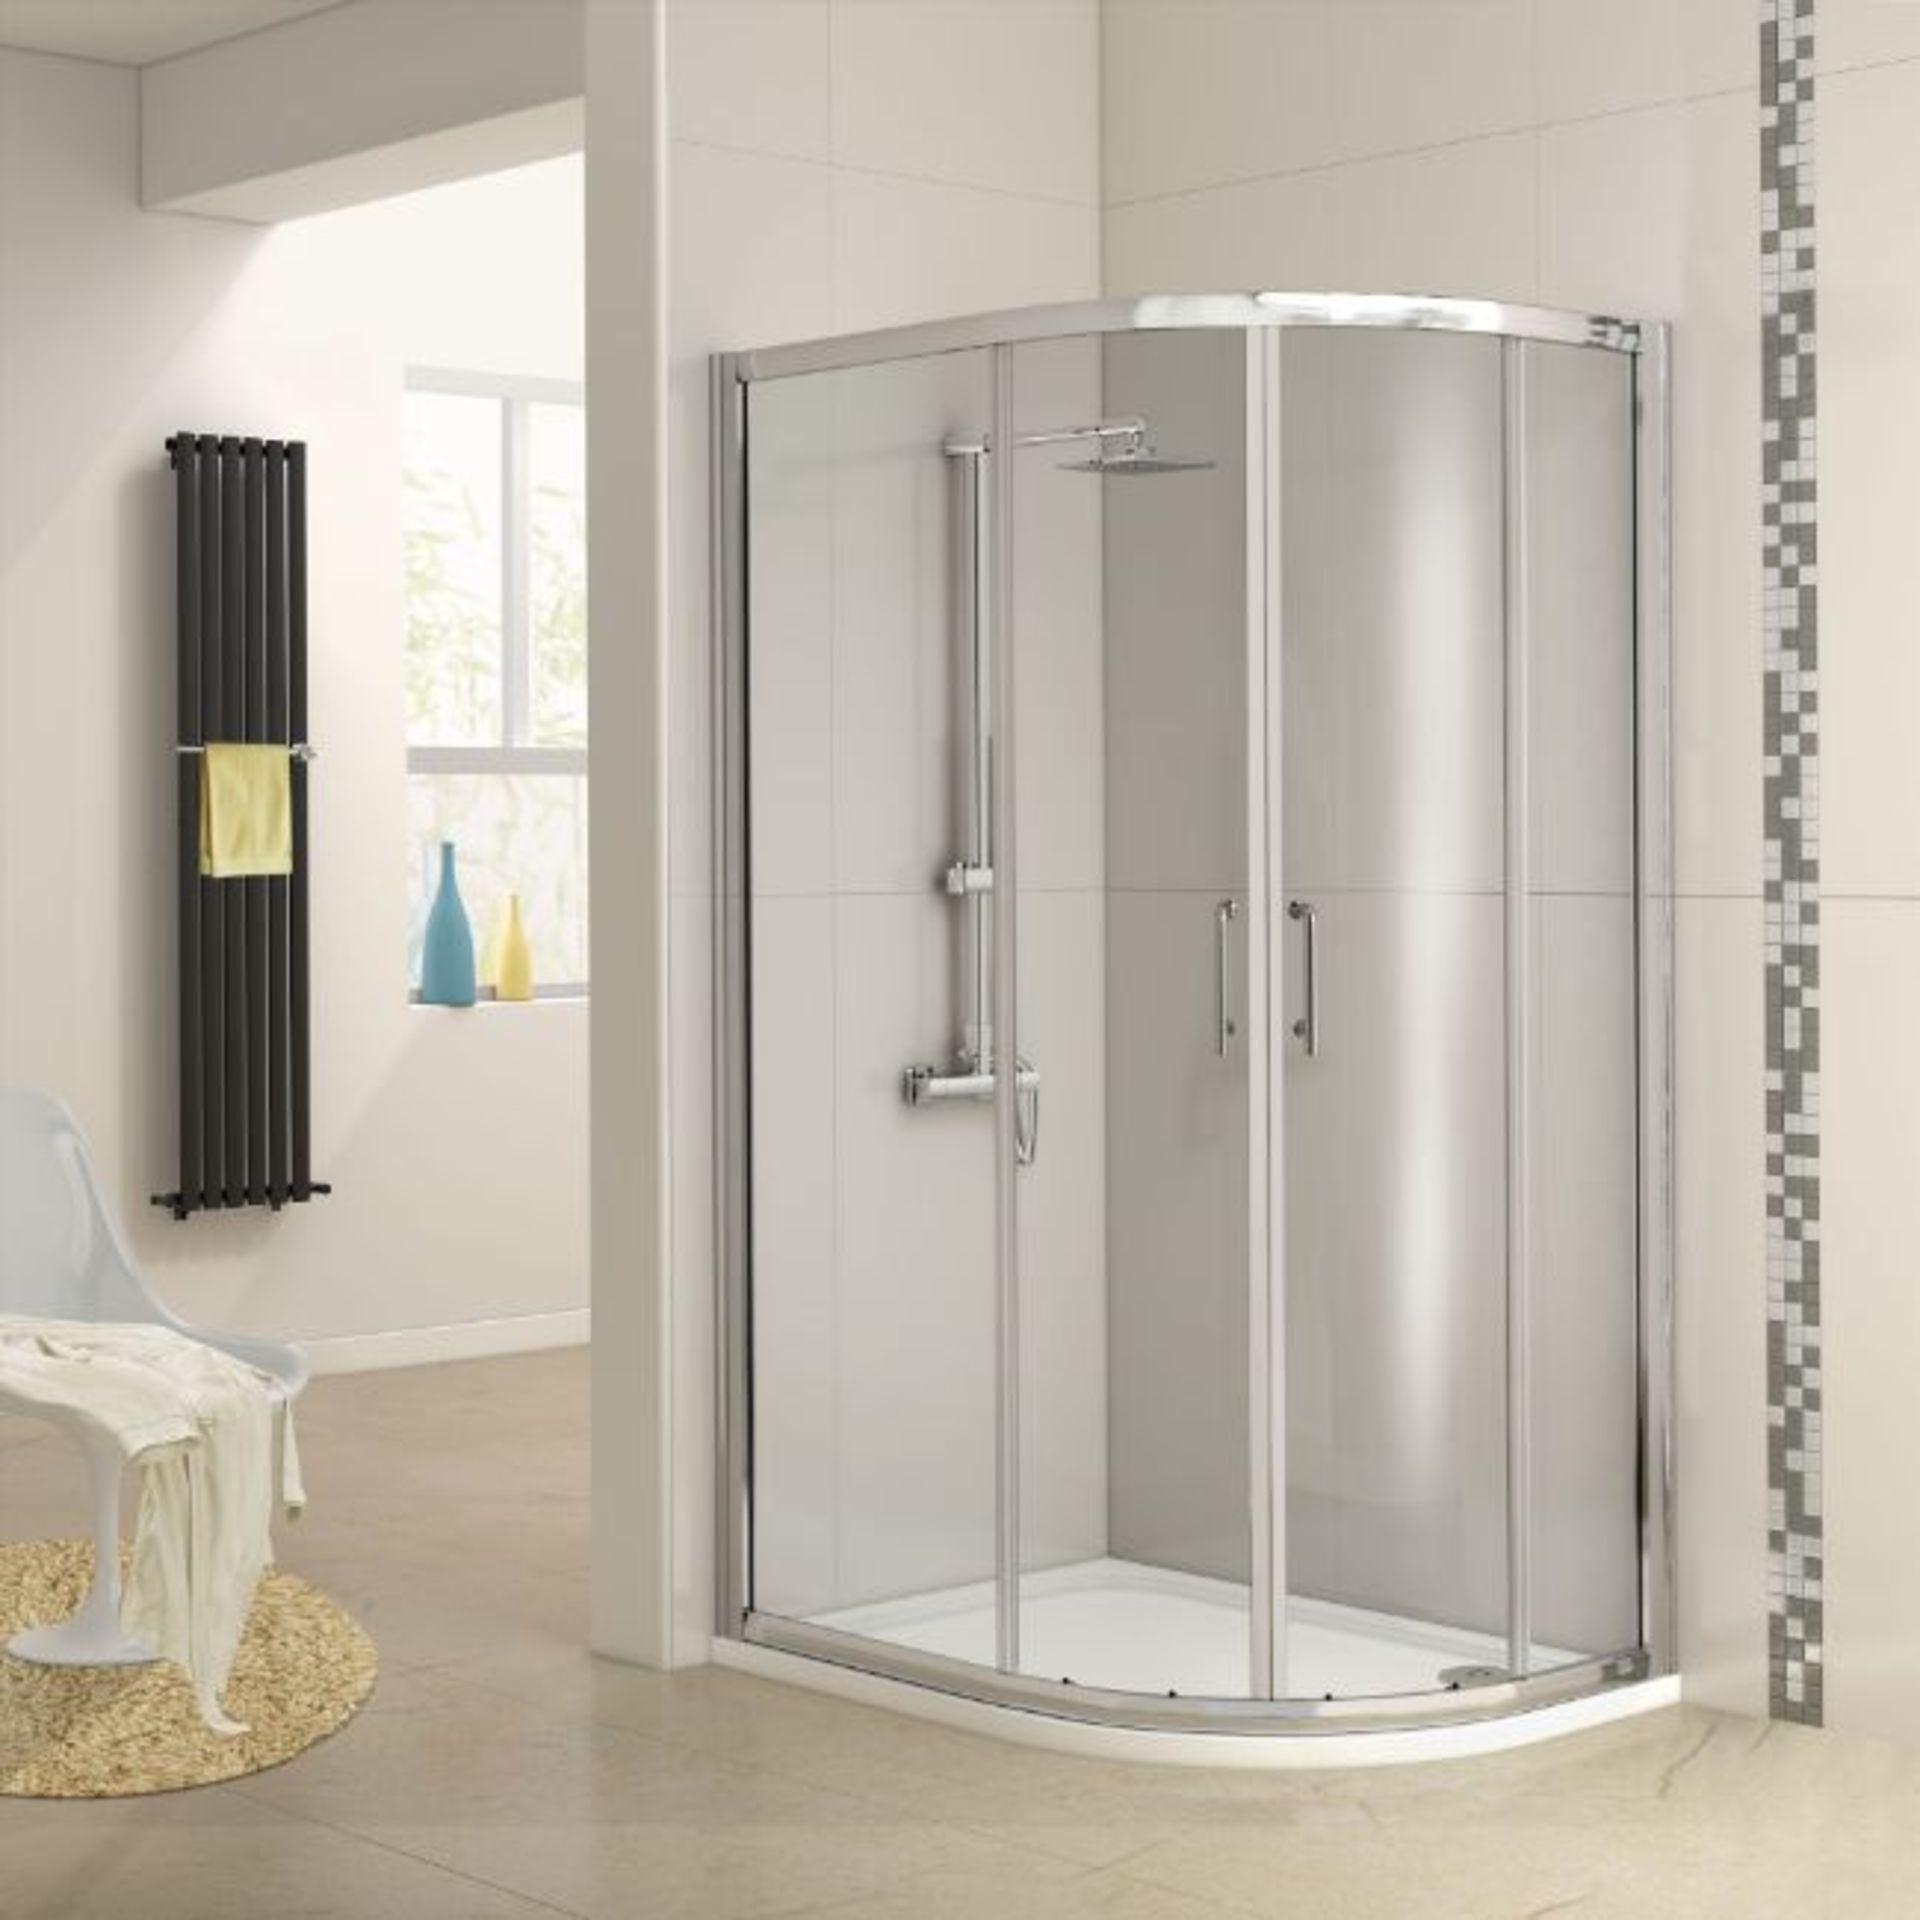 (REF84) 1200x900mm - 6mm - Offset Quadrant Shower Enclosure. RRP £599.99.Make the most of tha... - Image 2 of 4